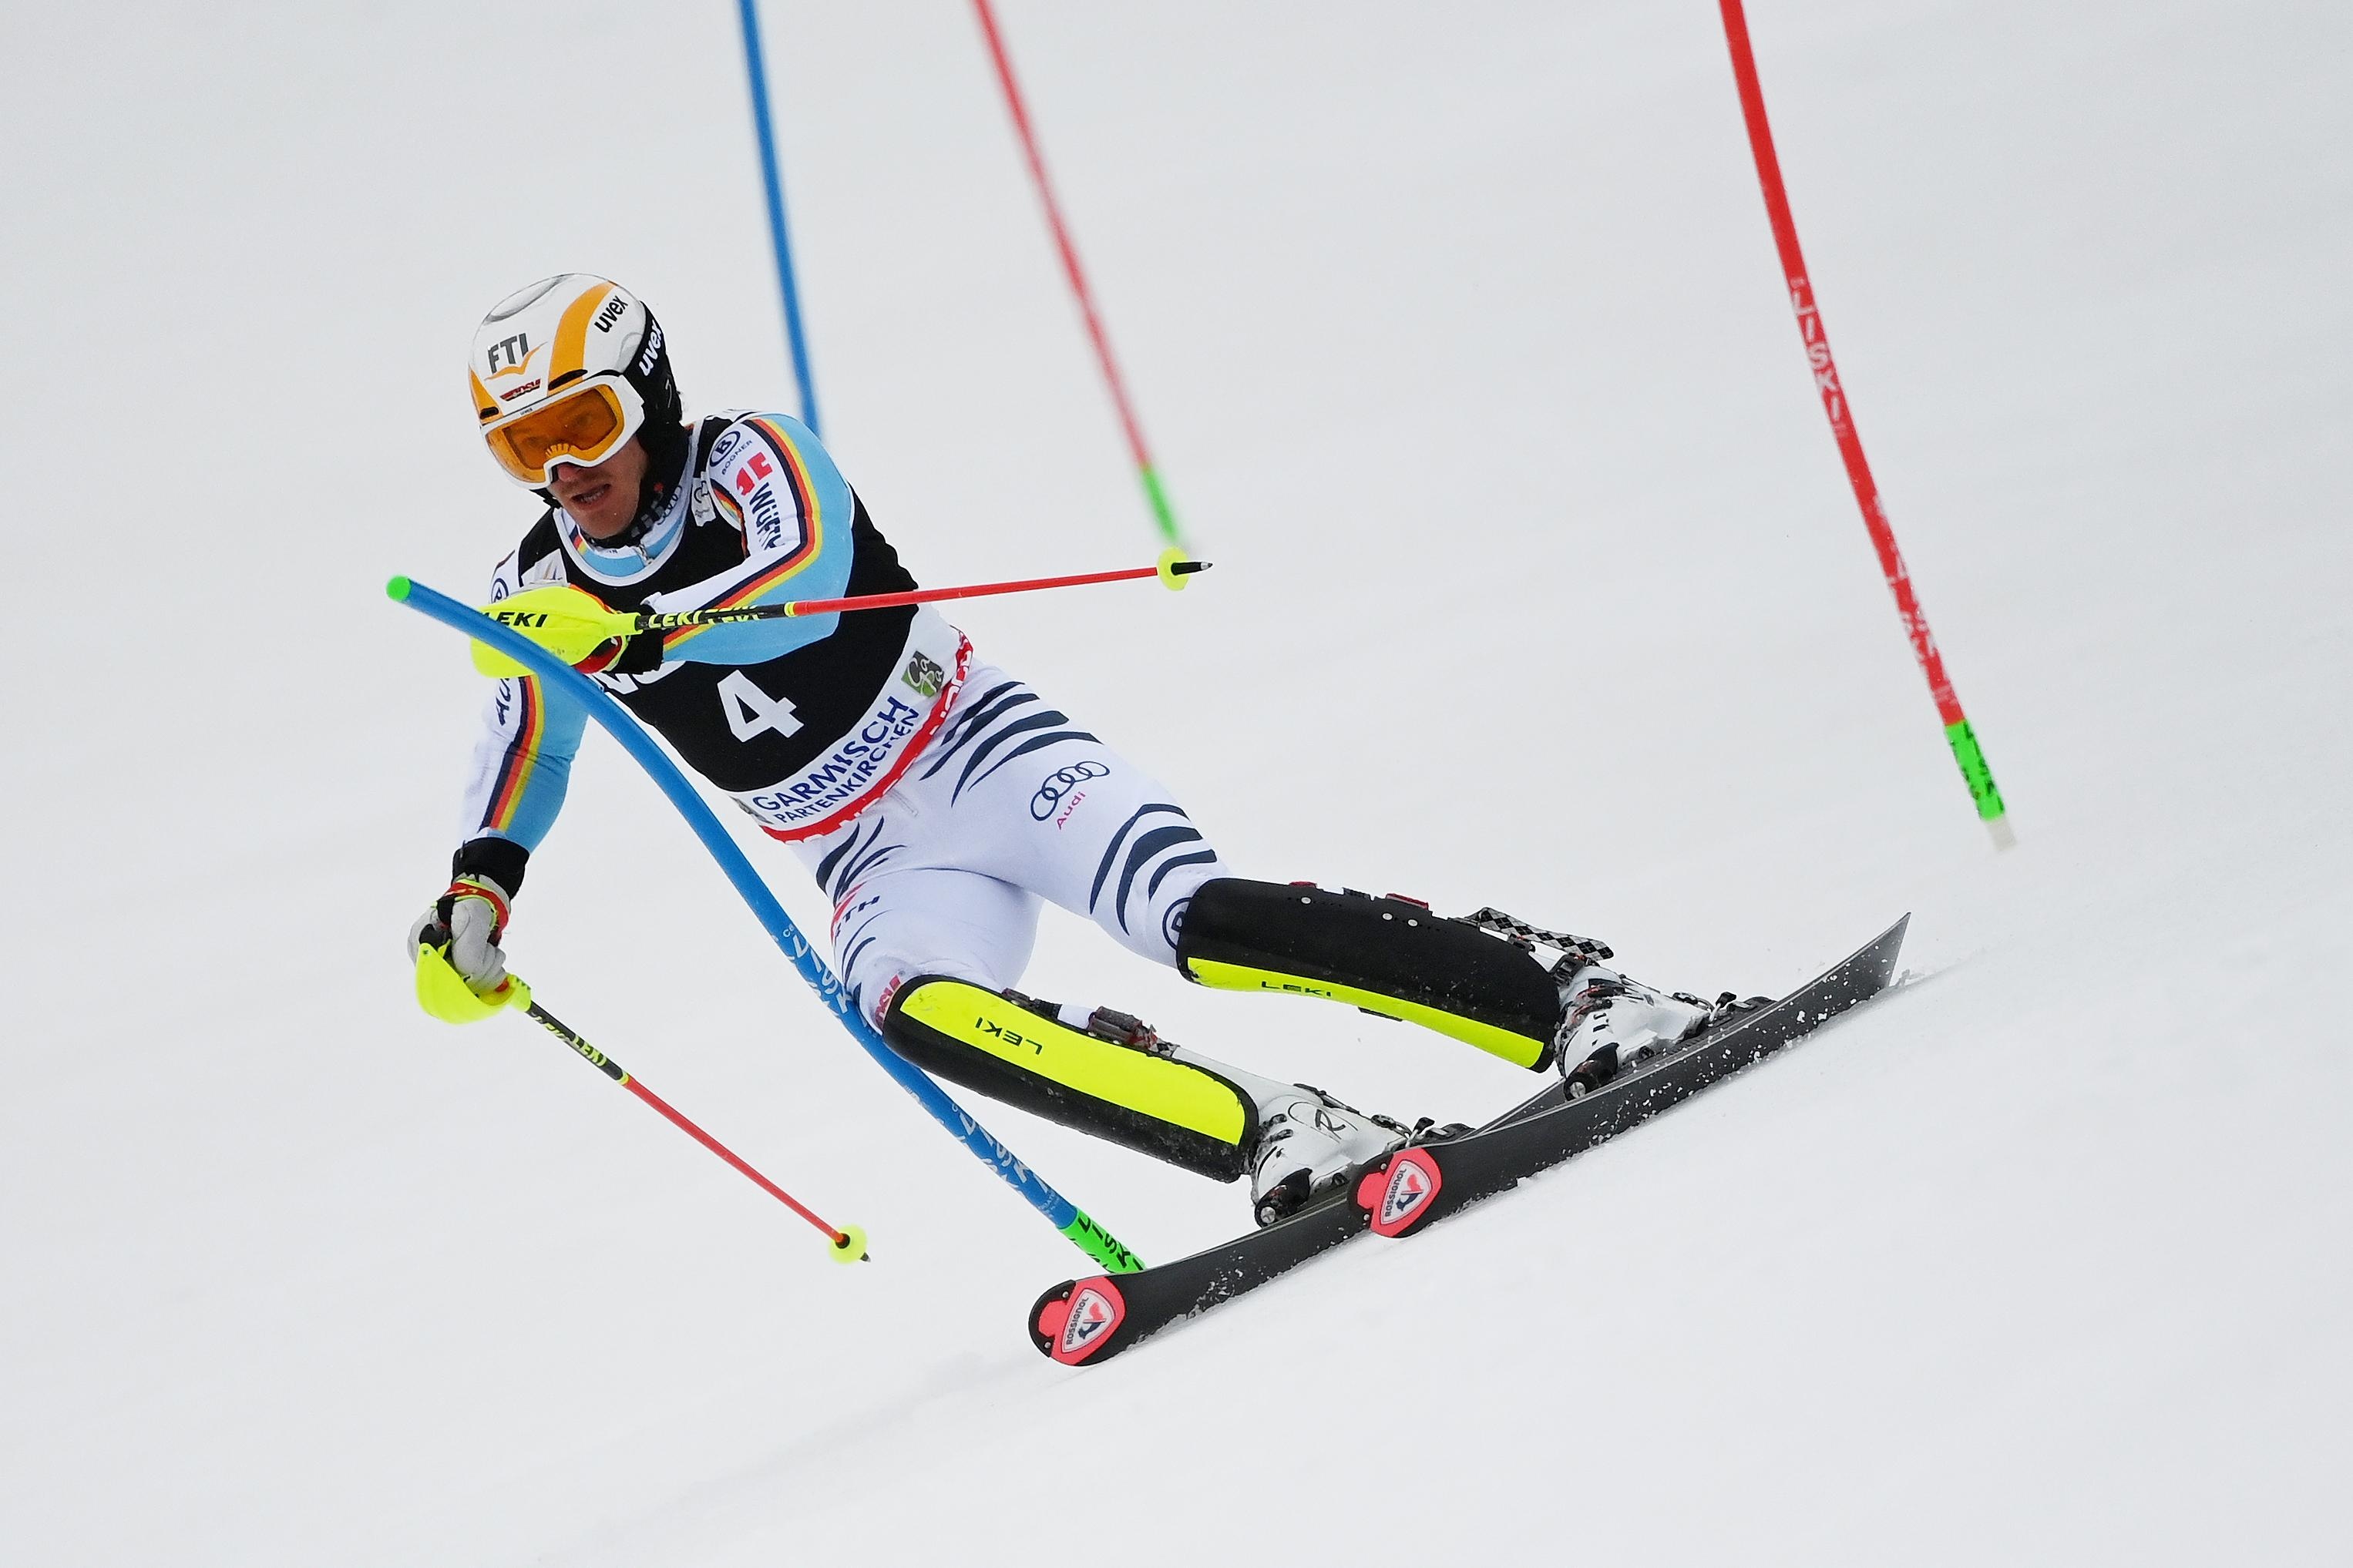 Slalom: A timed race on skis over a winding or zigzag course, Linus Shtraser, Gudiberg. 3060x2040 HD Background.